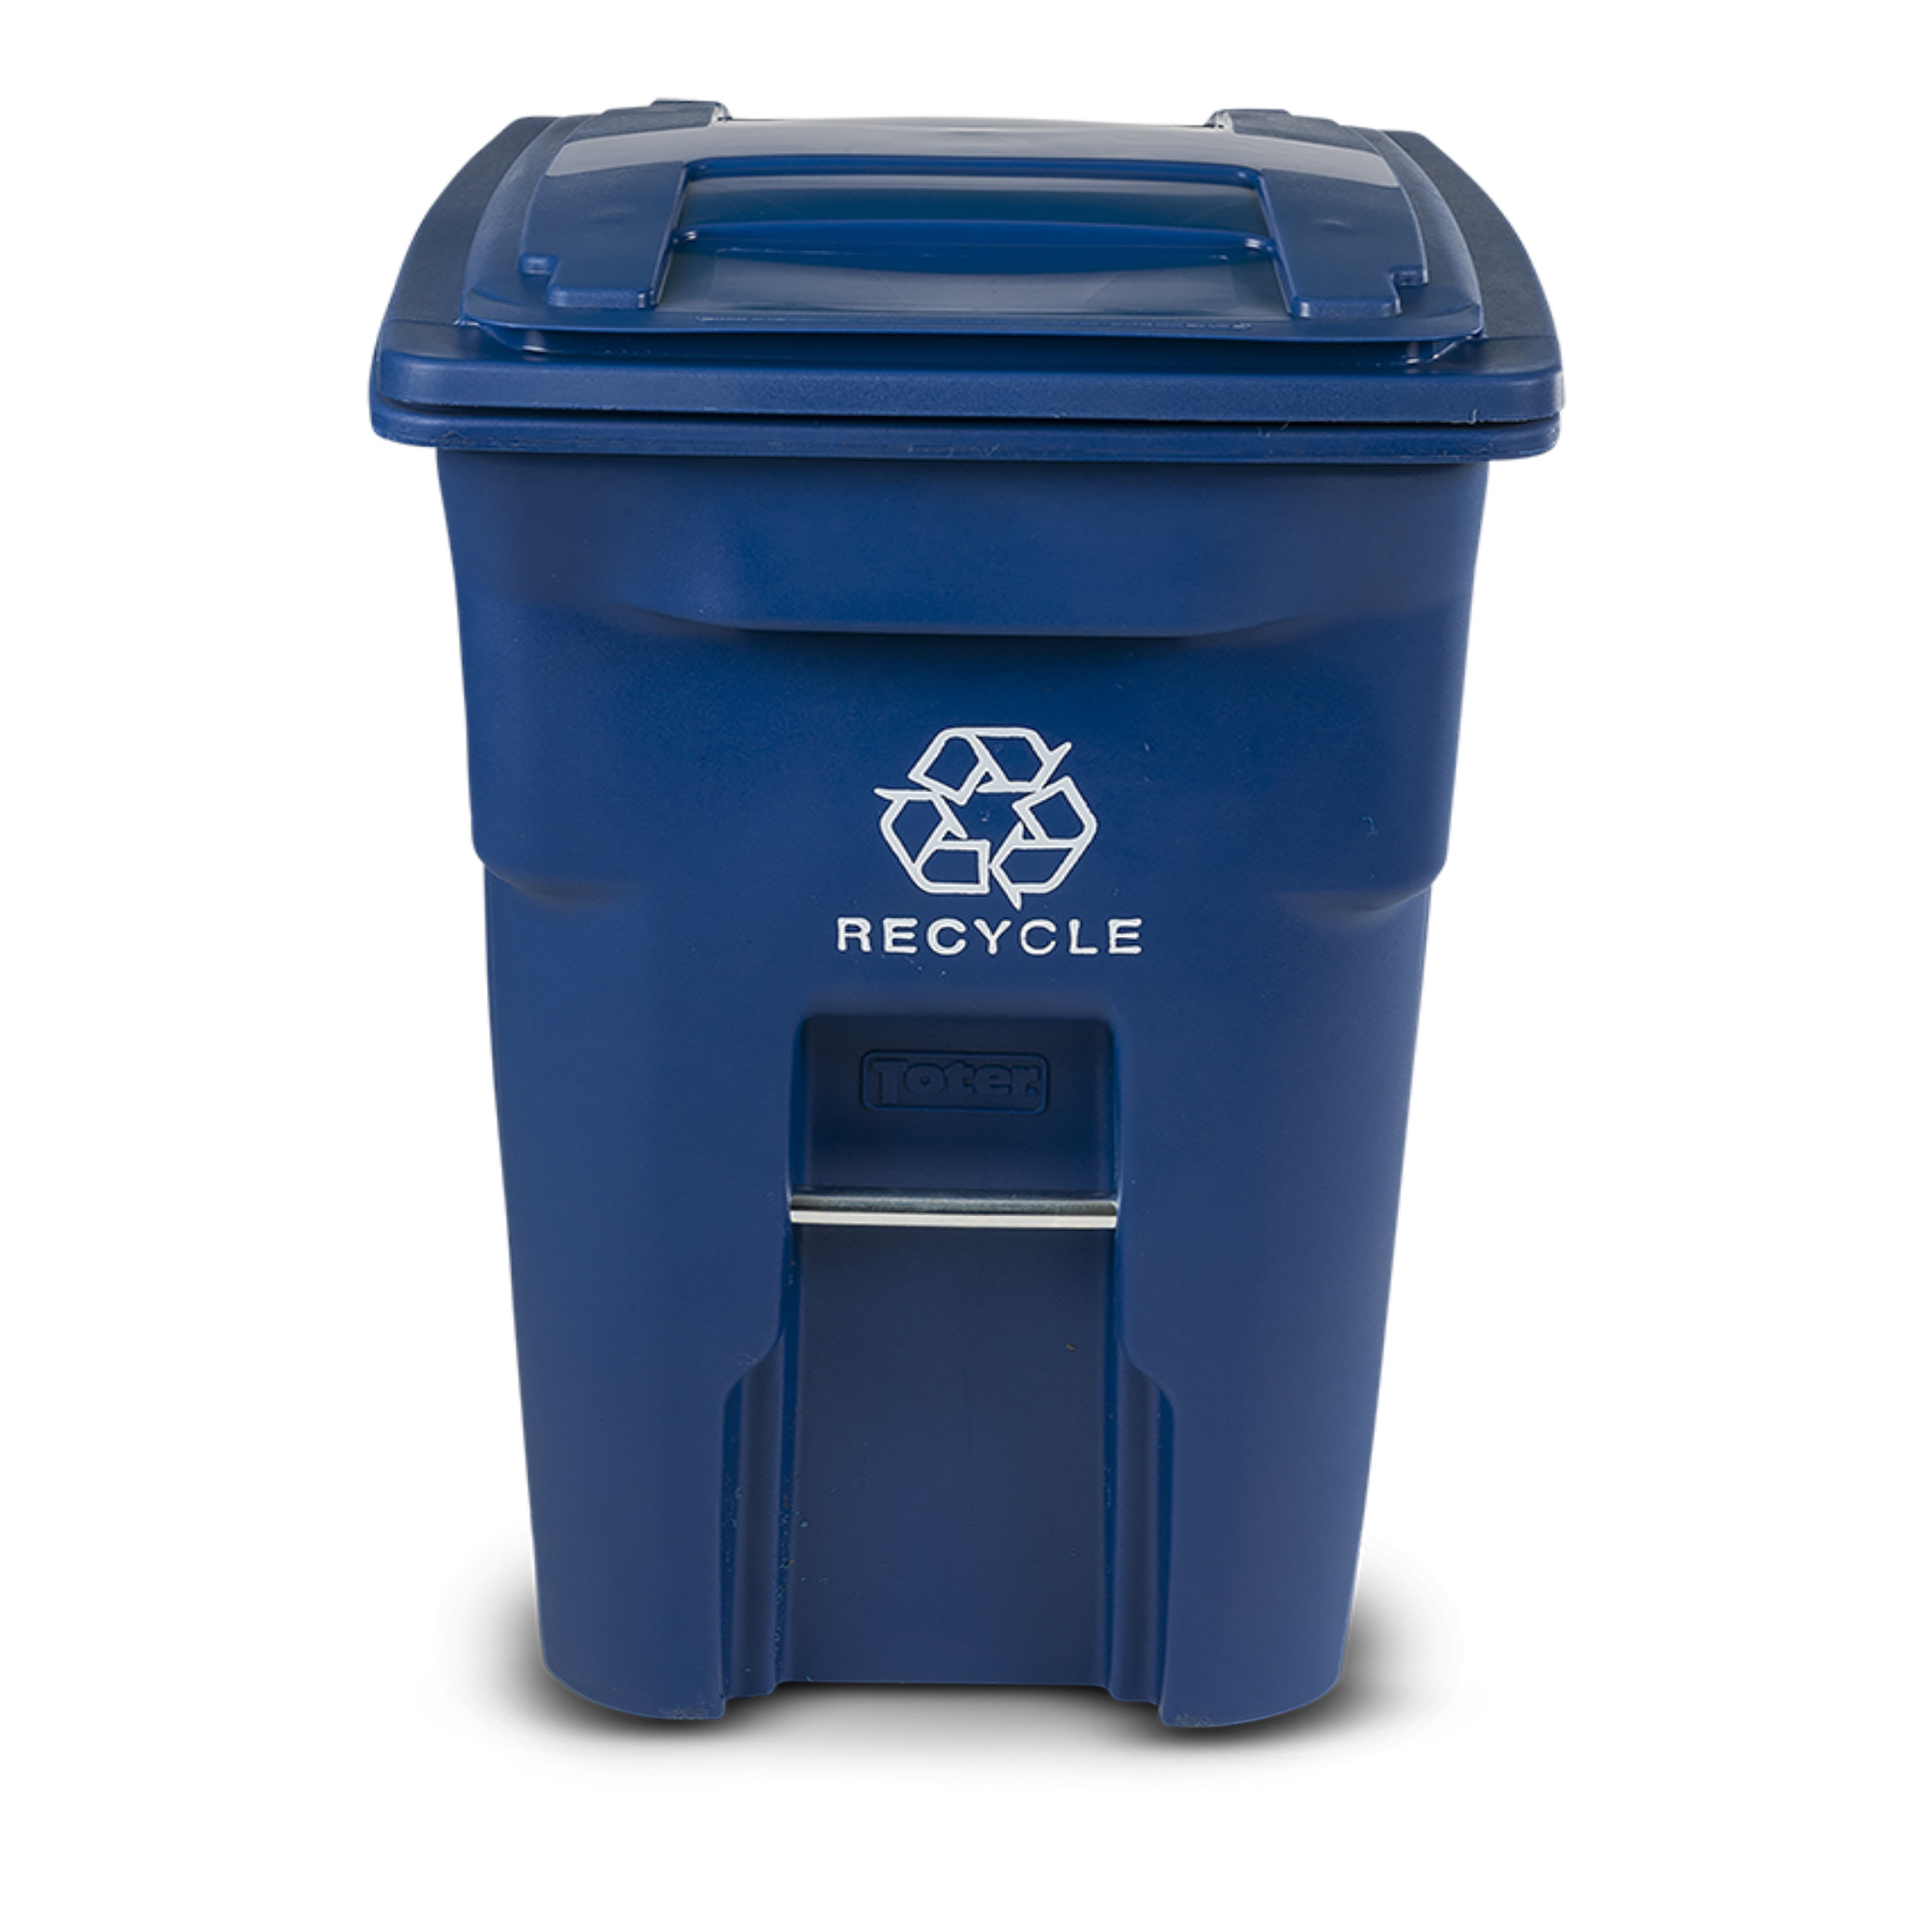 https://www.toter.com/sites/default/files/2021-05/Toter_96Gallon_TwoWheelRecycle_Blue_25596_Front.png